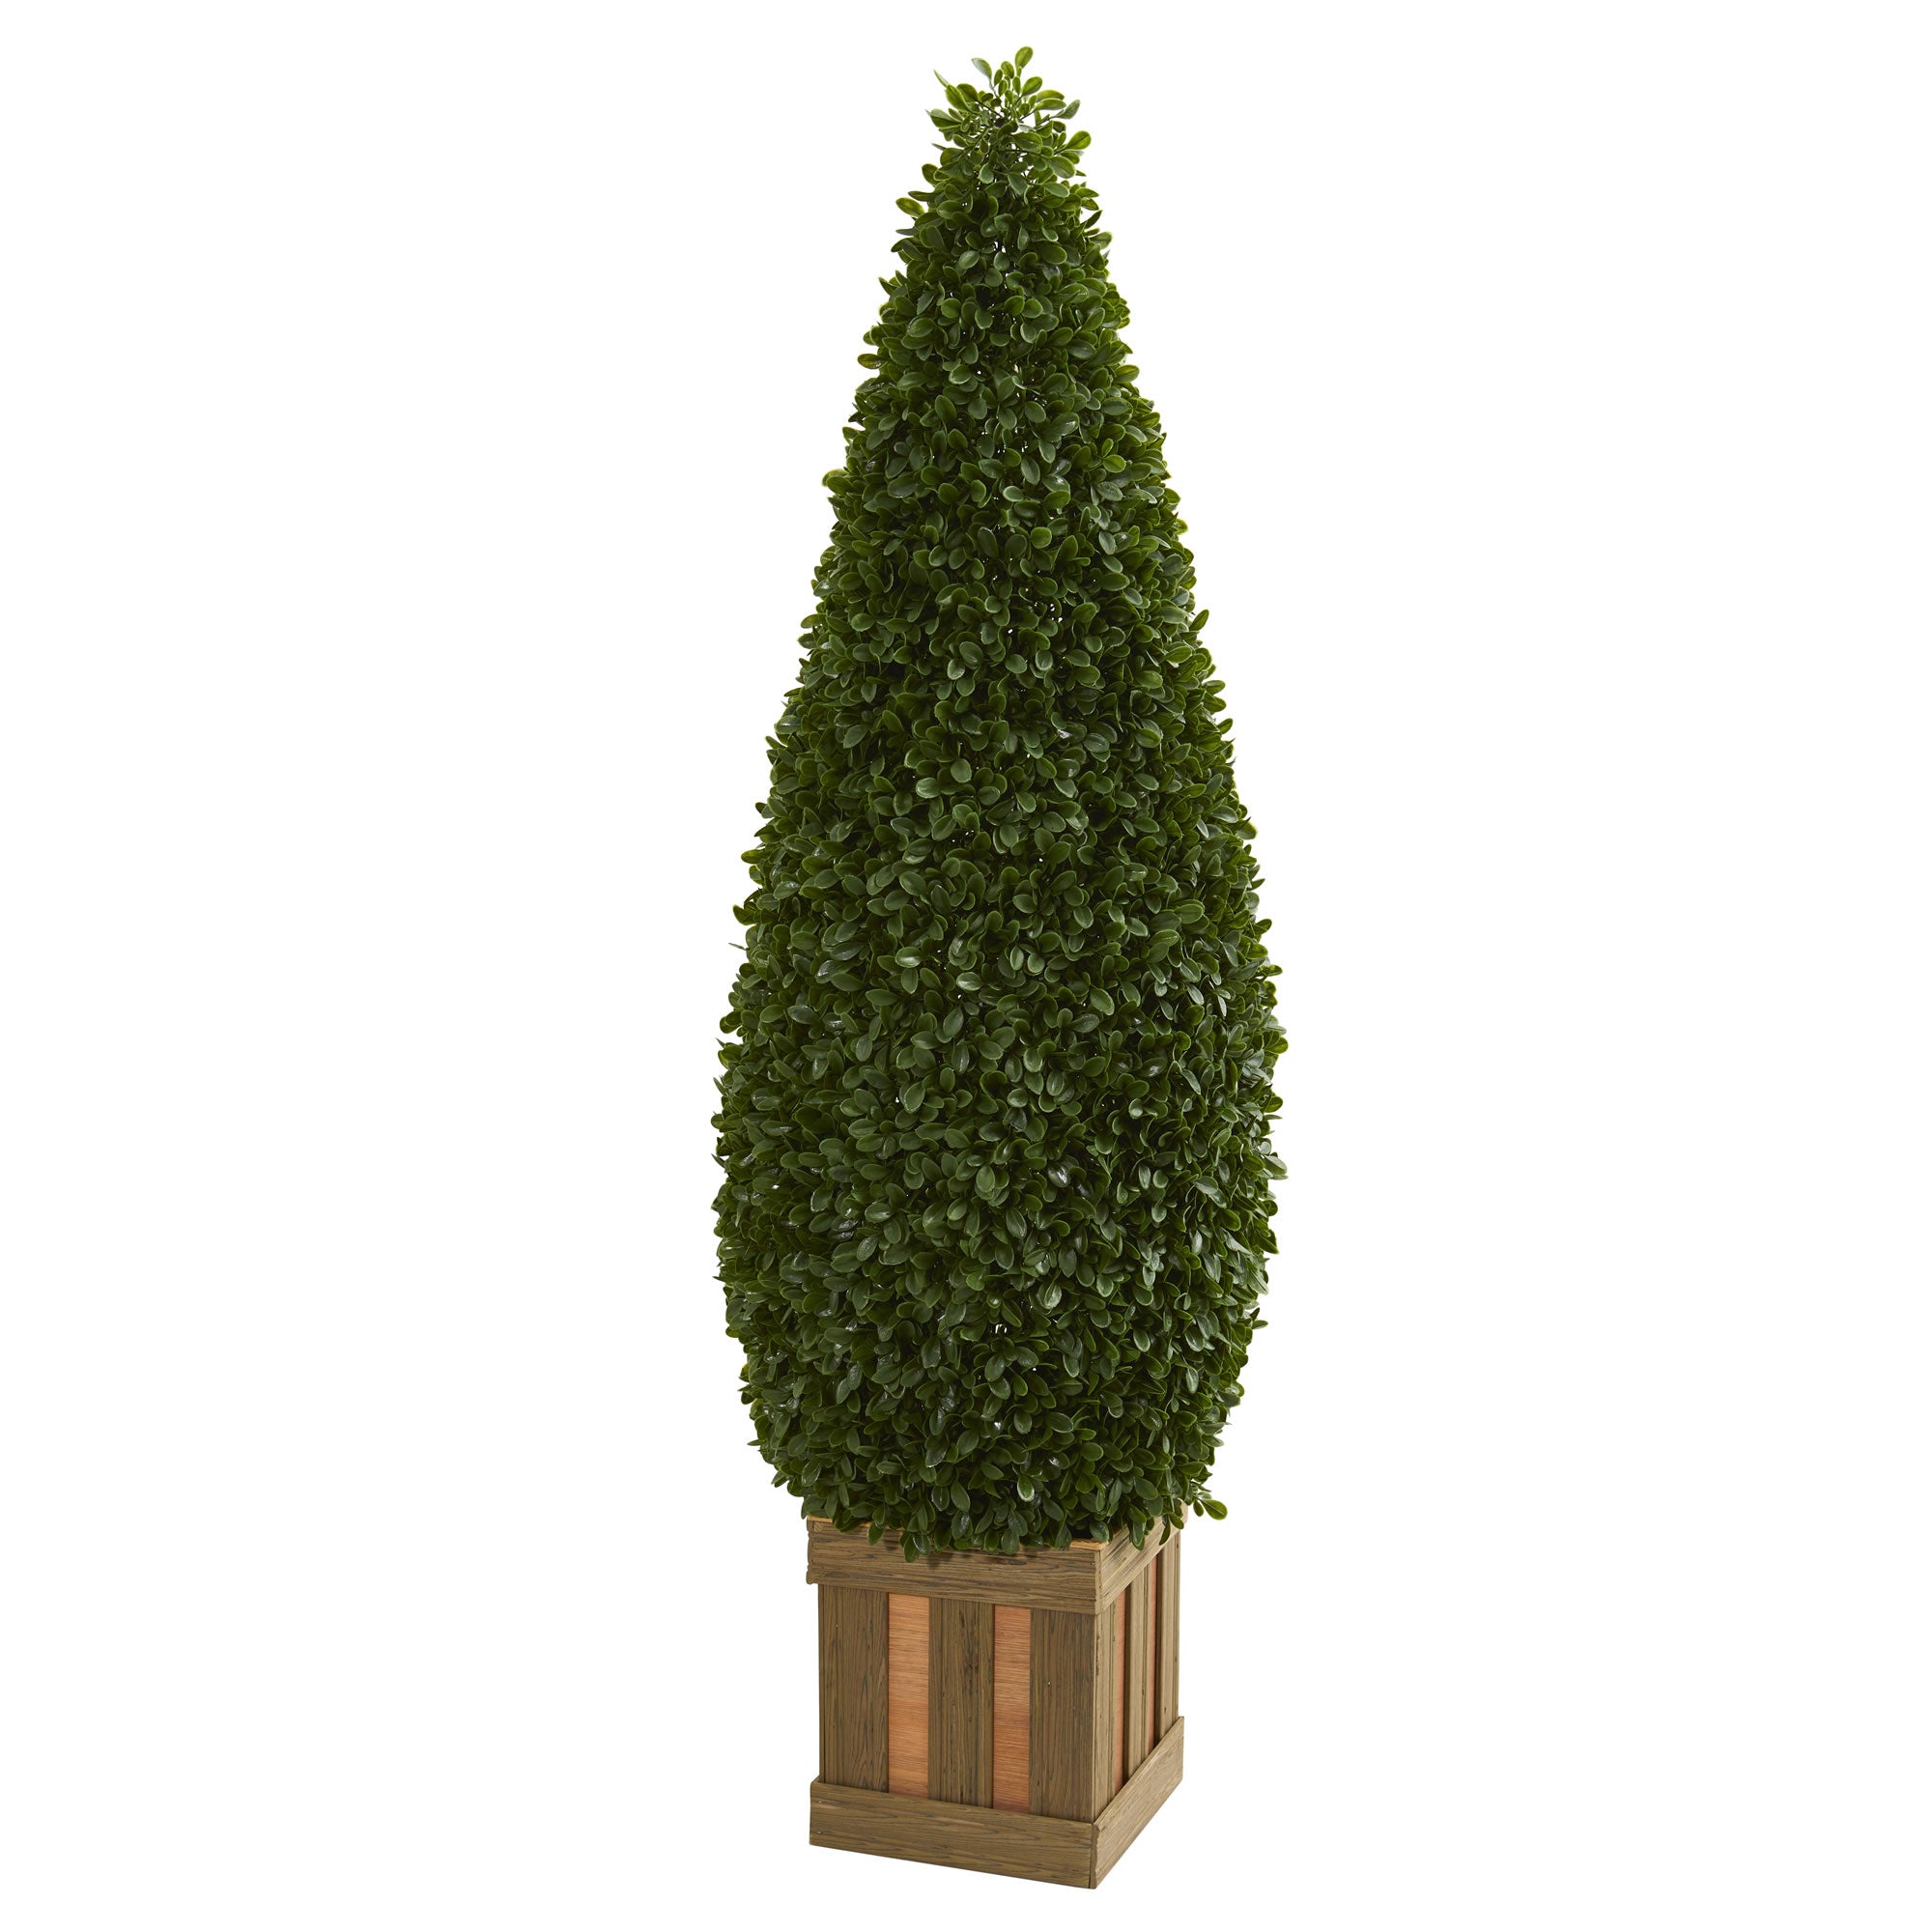 5' Boxwood Cone Topiary Artificial Tree with Decorative Planter